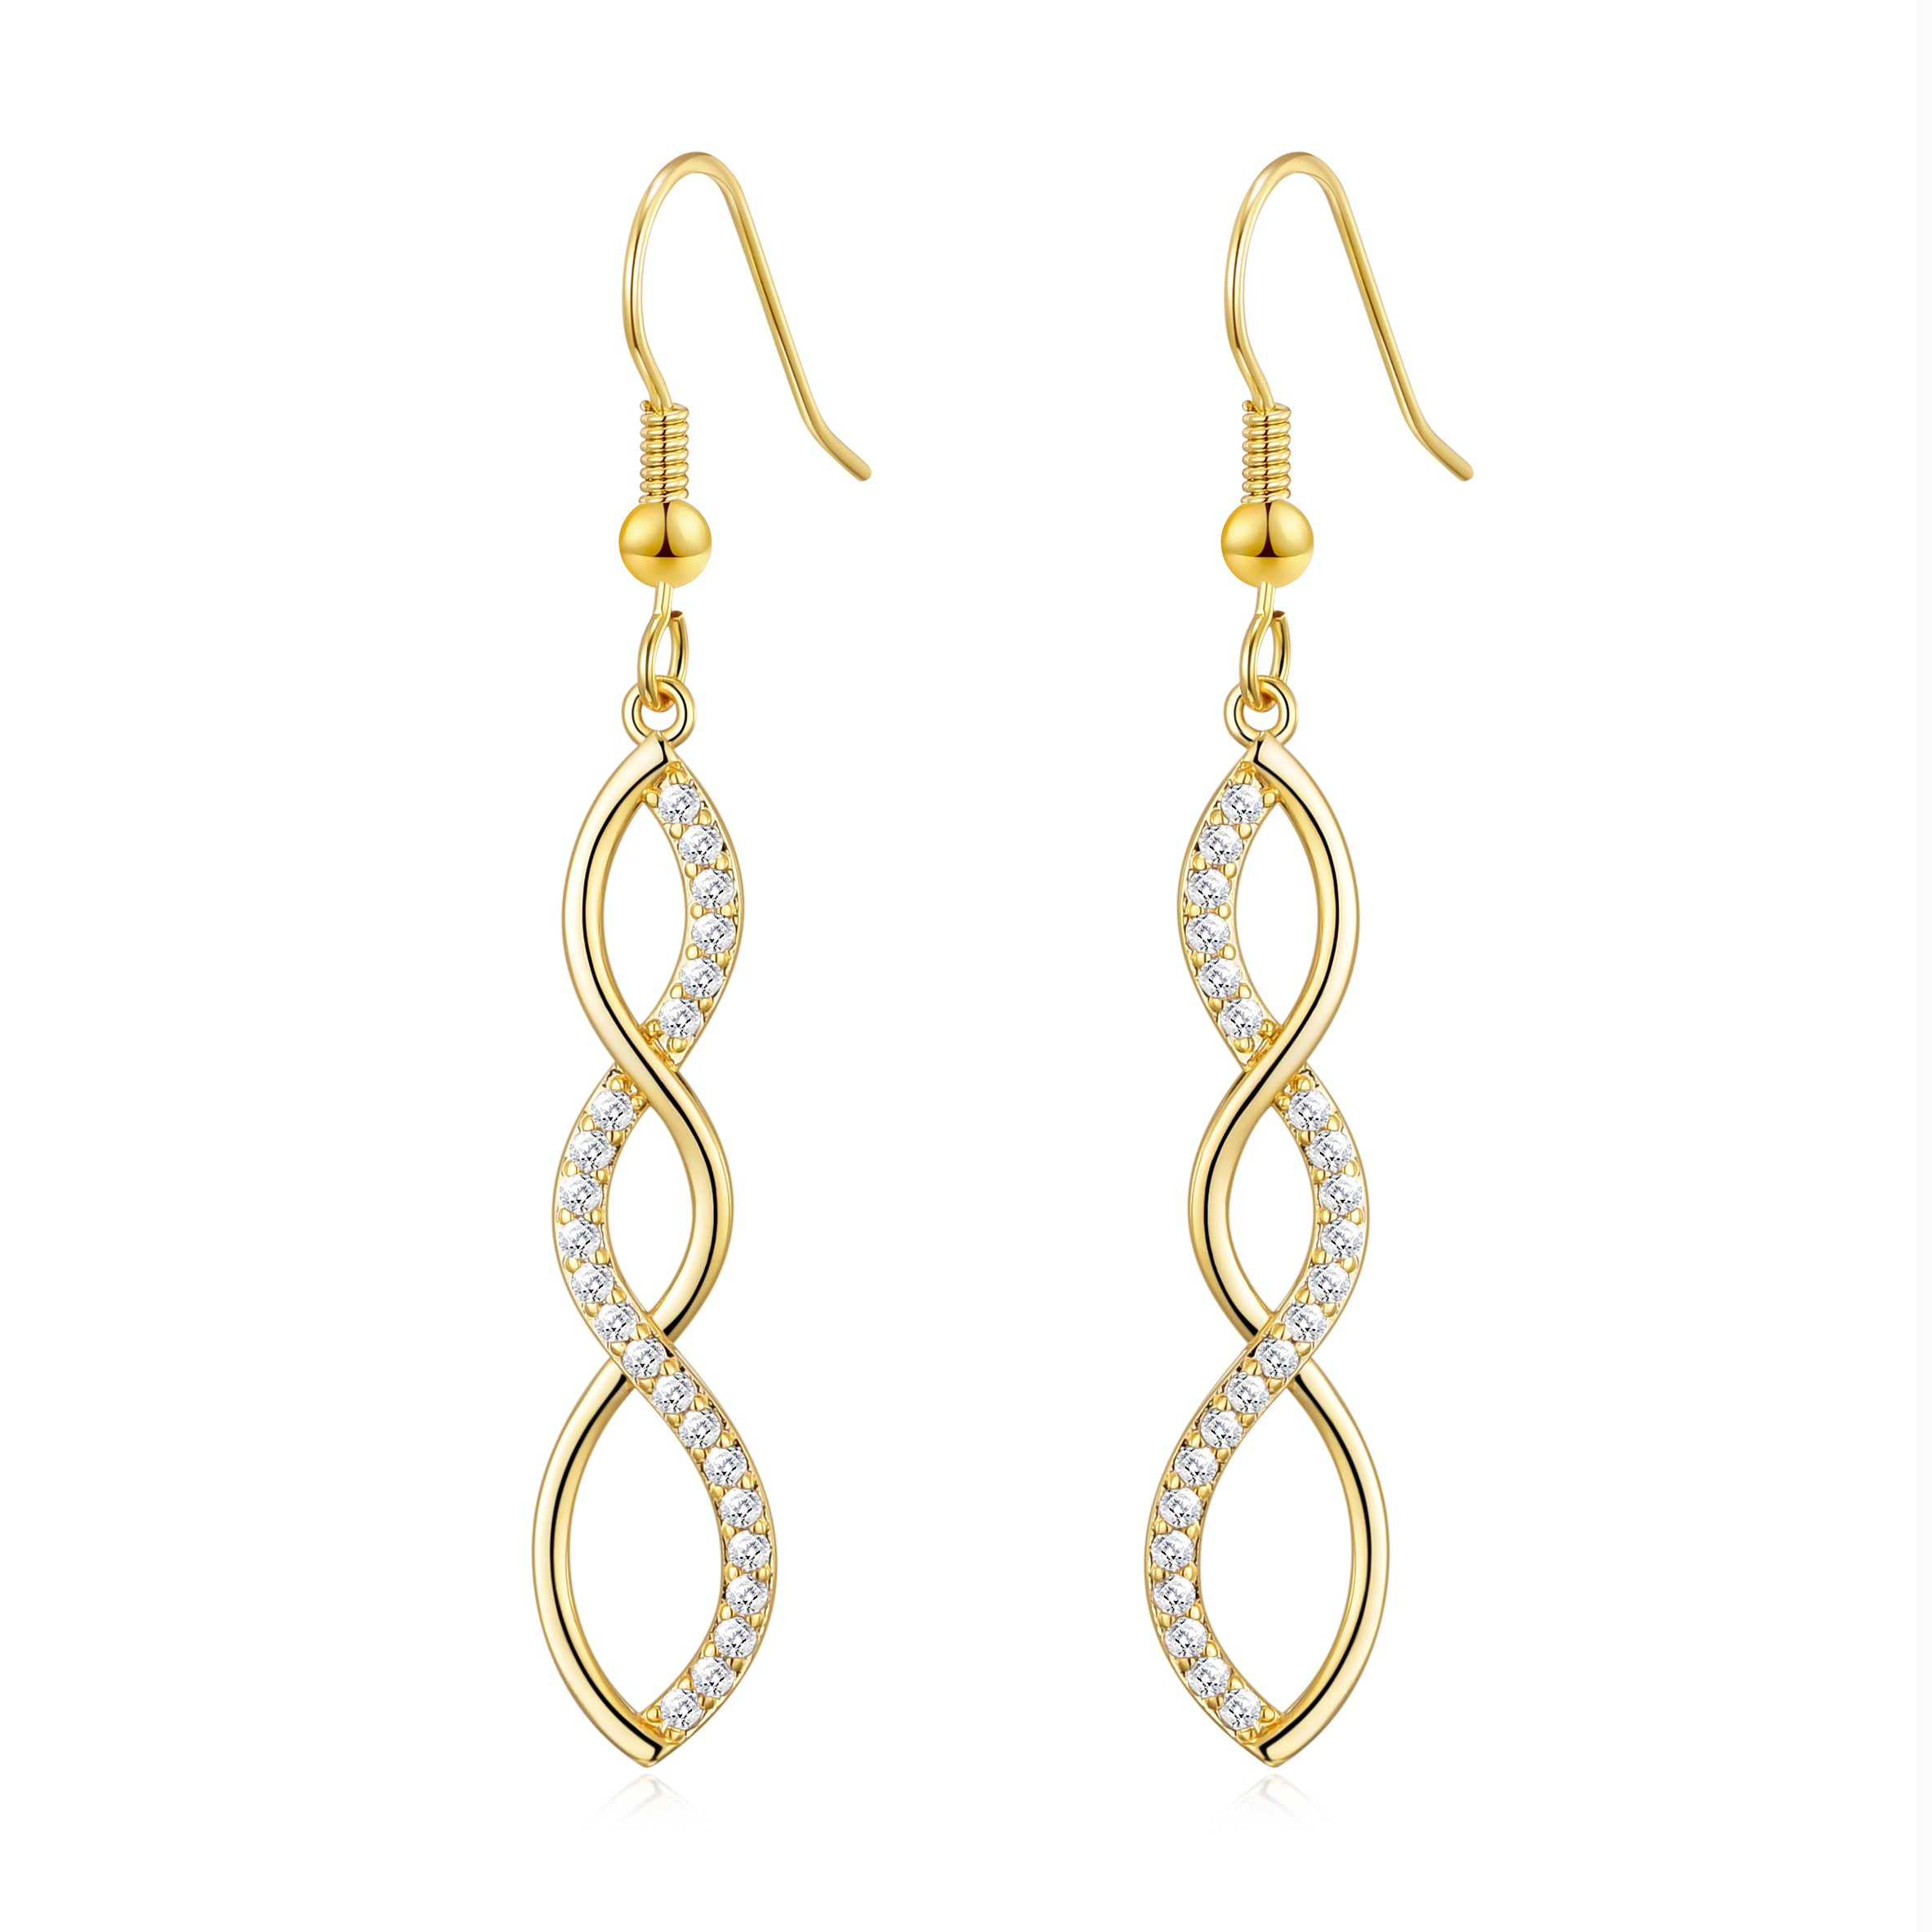 Gold Plated Twist Drop Earrings Created with Zircondia® Crystals by Philip Jones Jewellery